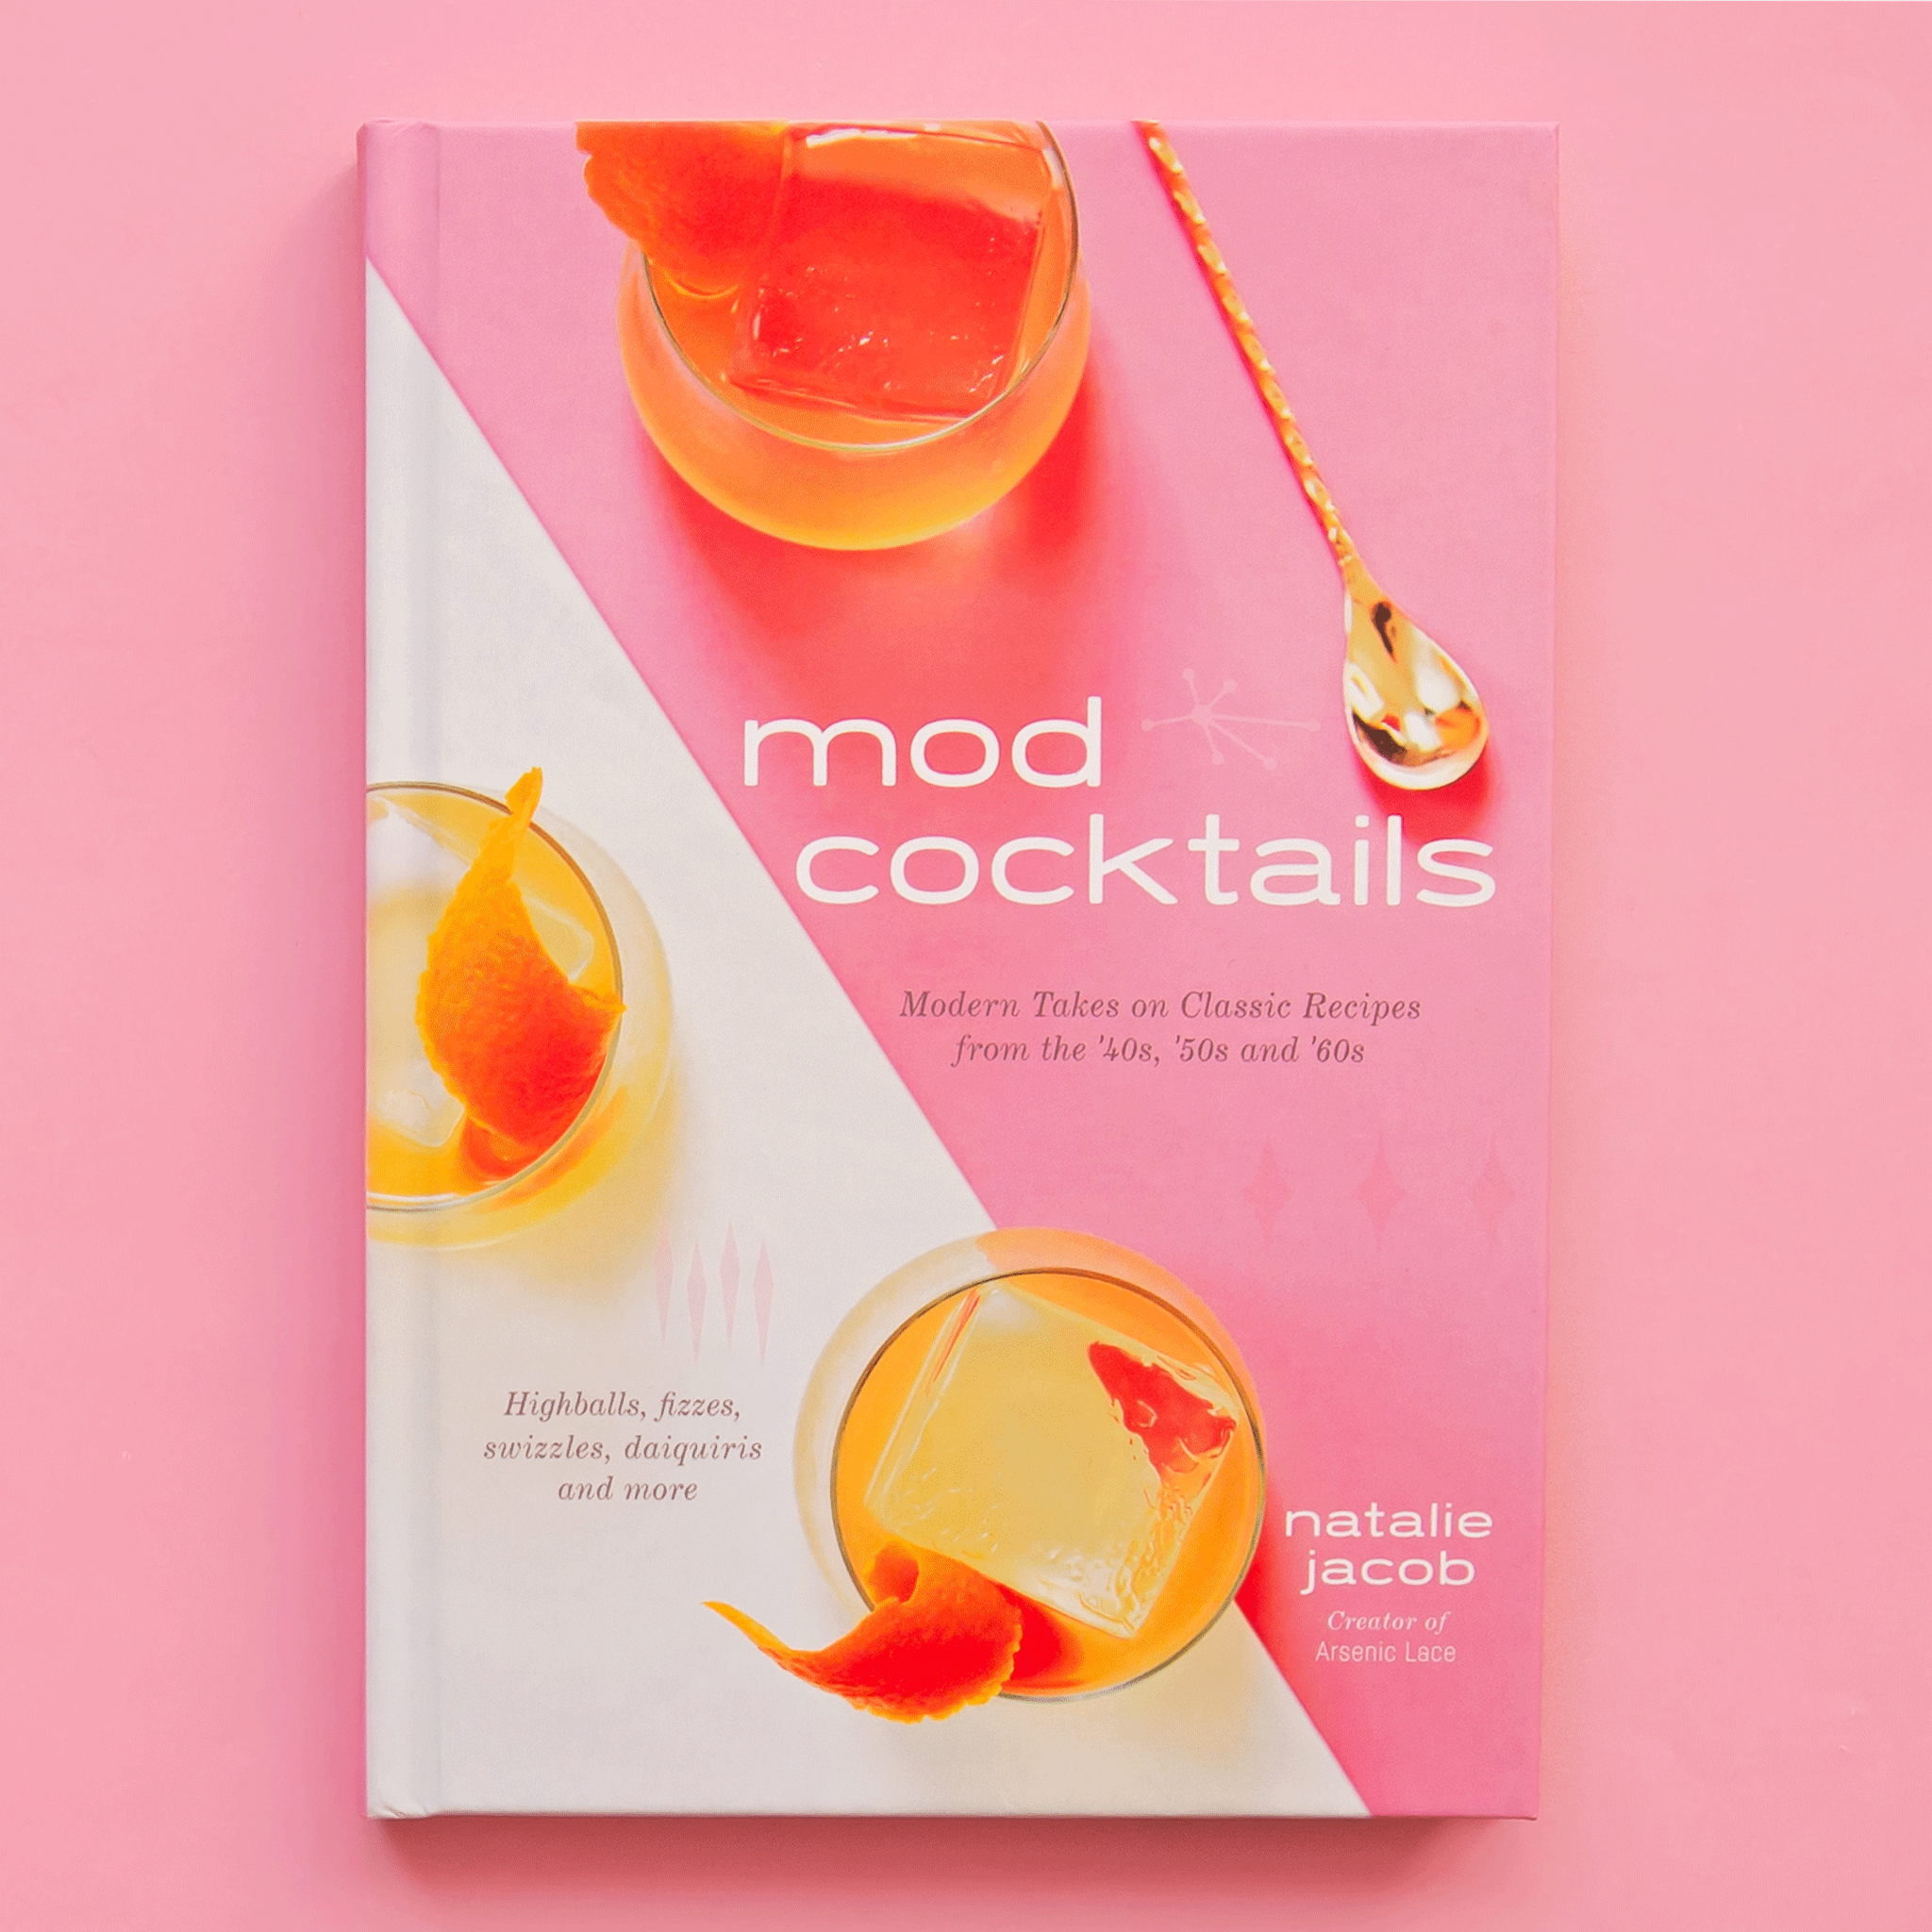 On a pink background is a pink bar book with cocktail glasses on the front cover and a title that reads, "mod cocktails Modern Takes on Classic Recipes from the '40s, '50s and '60s".